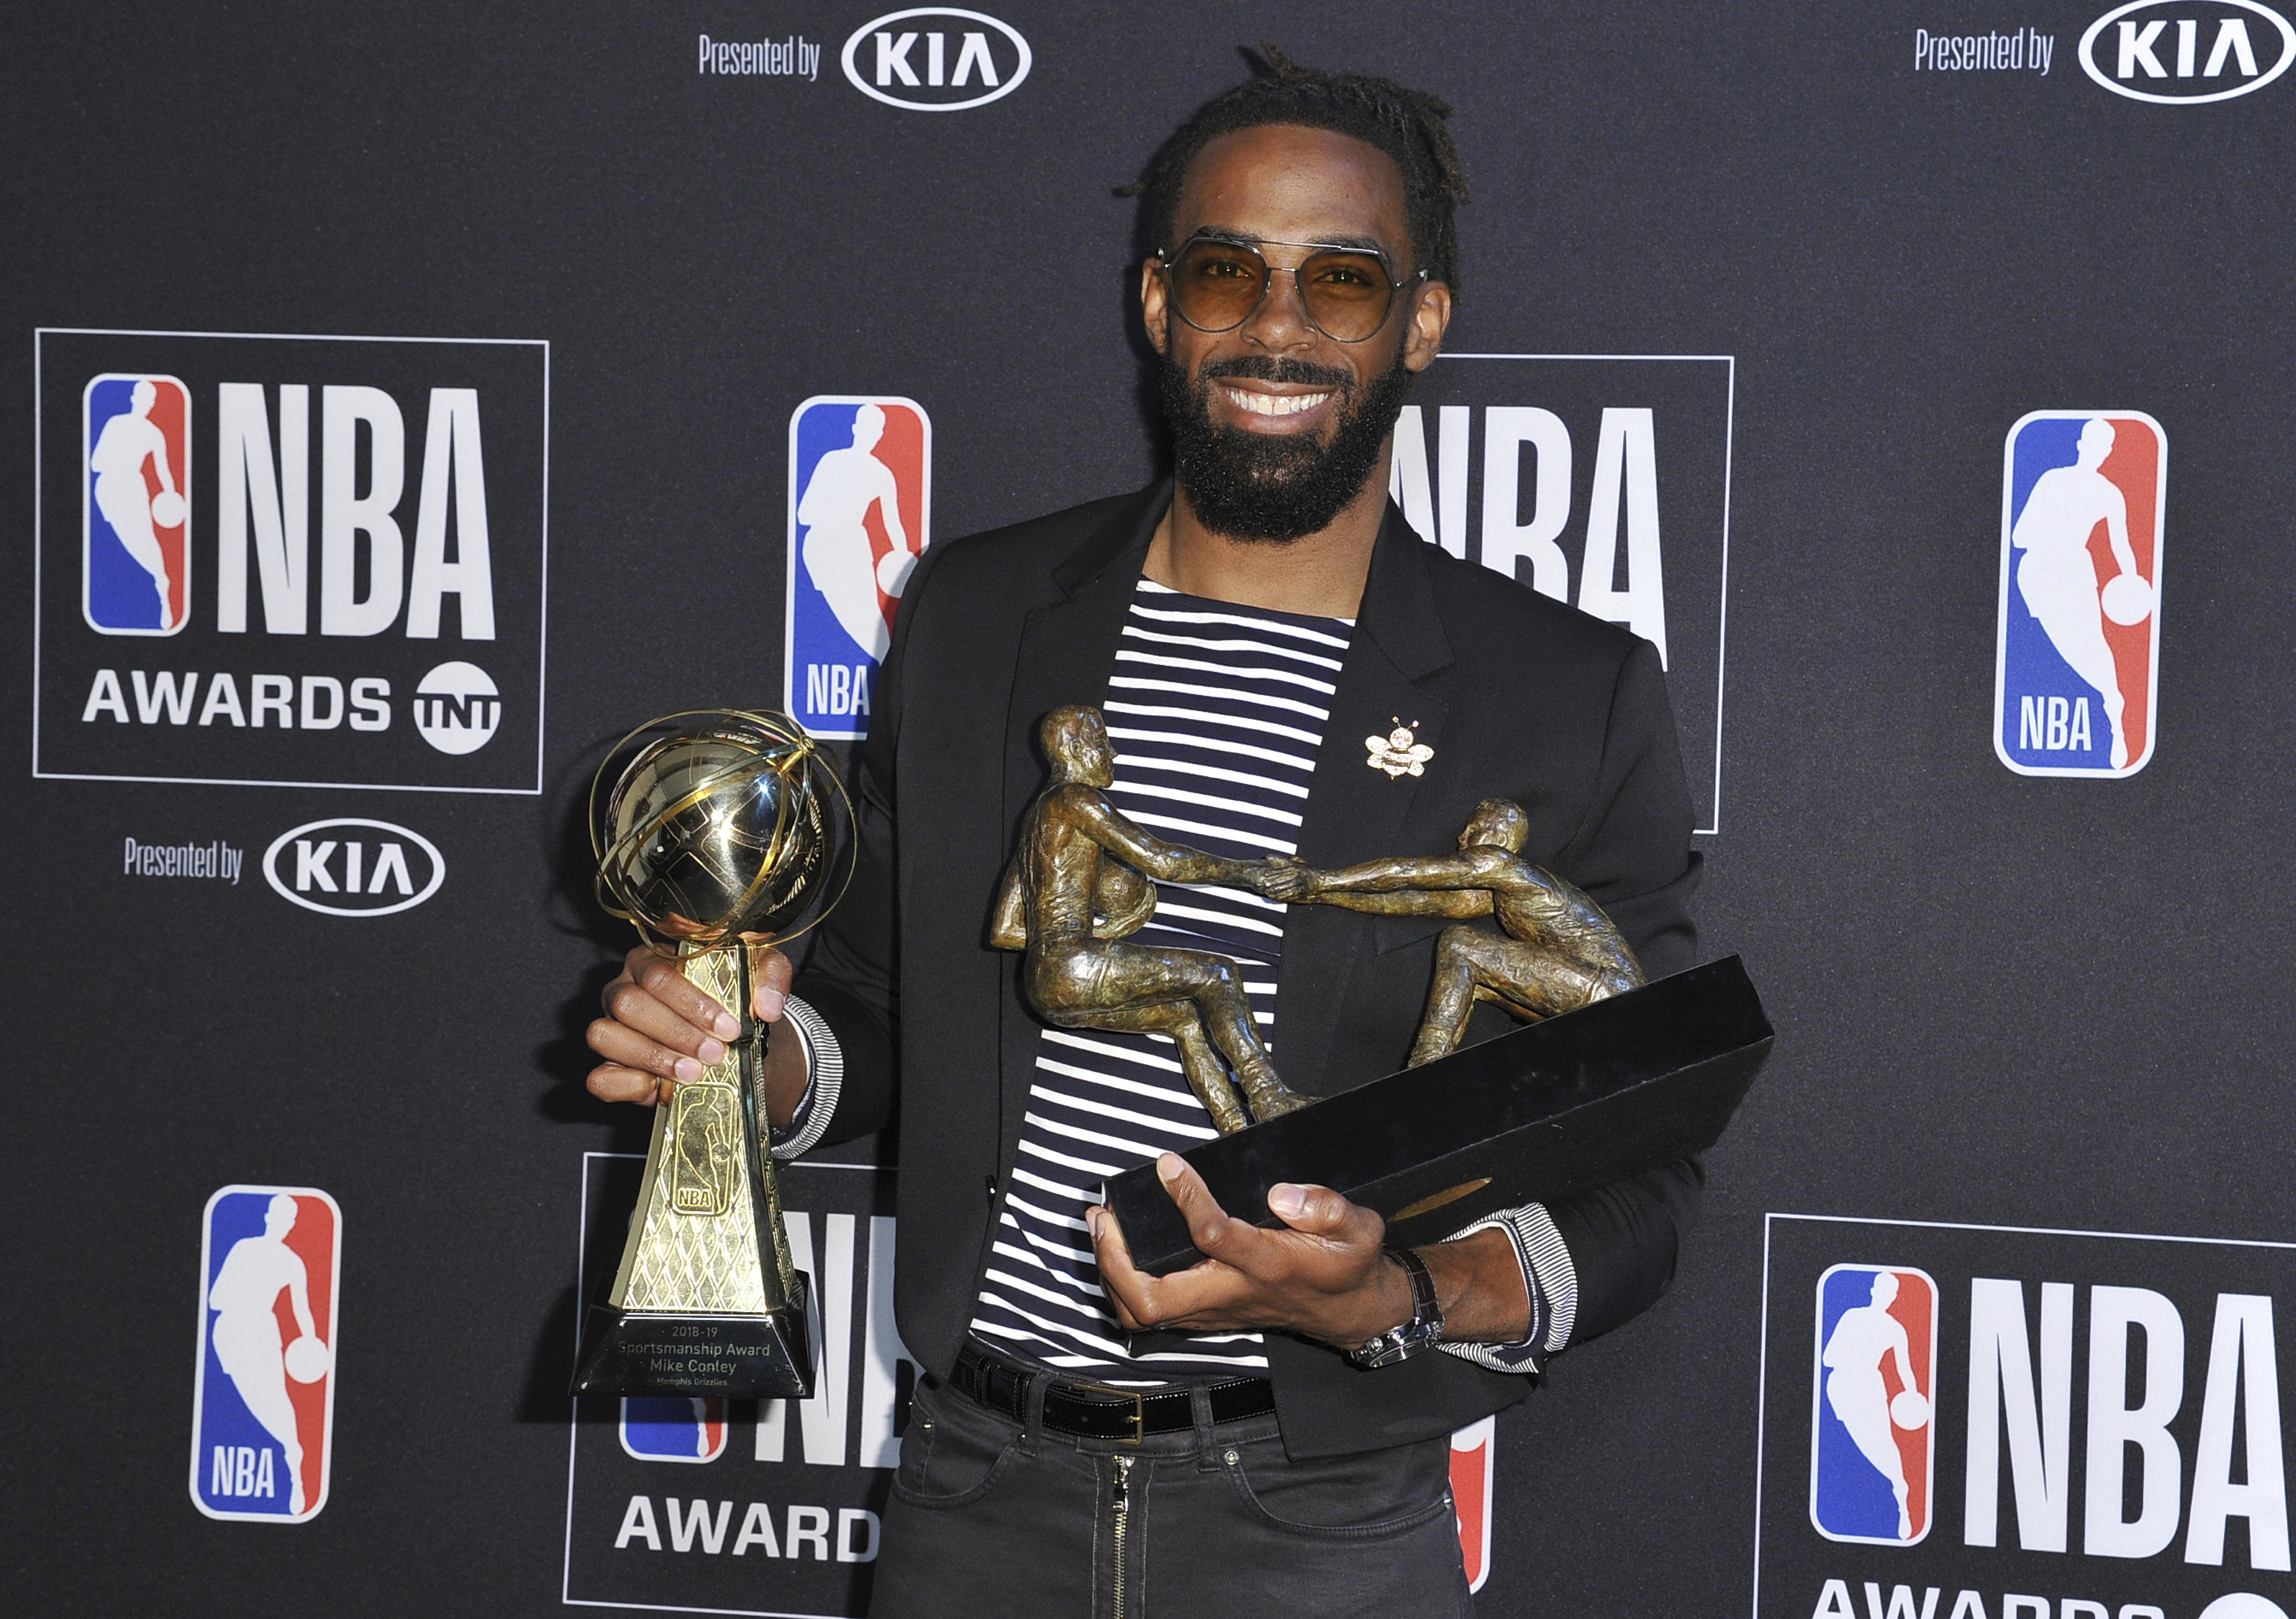 NBA: Wolves Guard Mike Conley Wins NBA Sportsmanship Award for Fourth Time  - Canis Hoopus